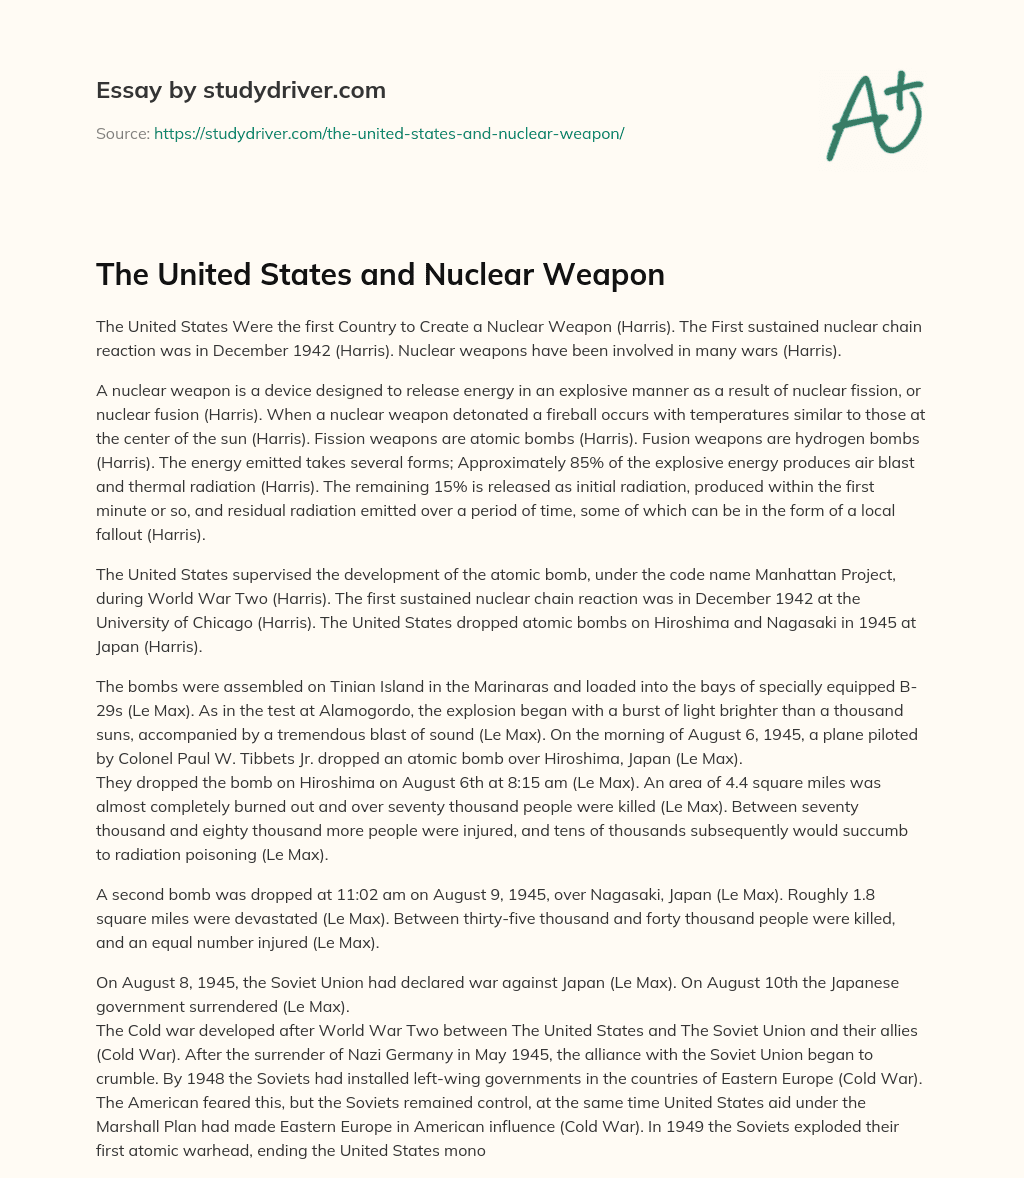 The United States and Nuclear Weapon essay